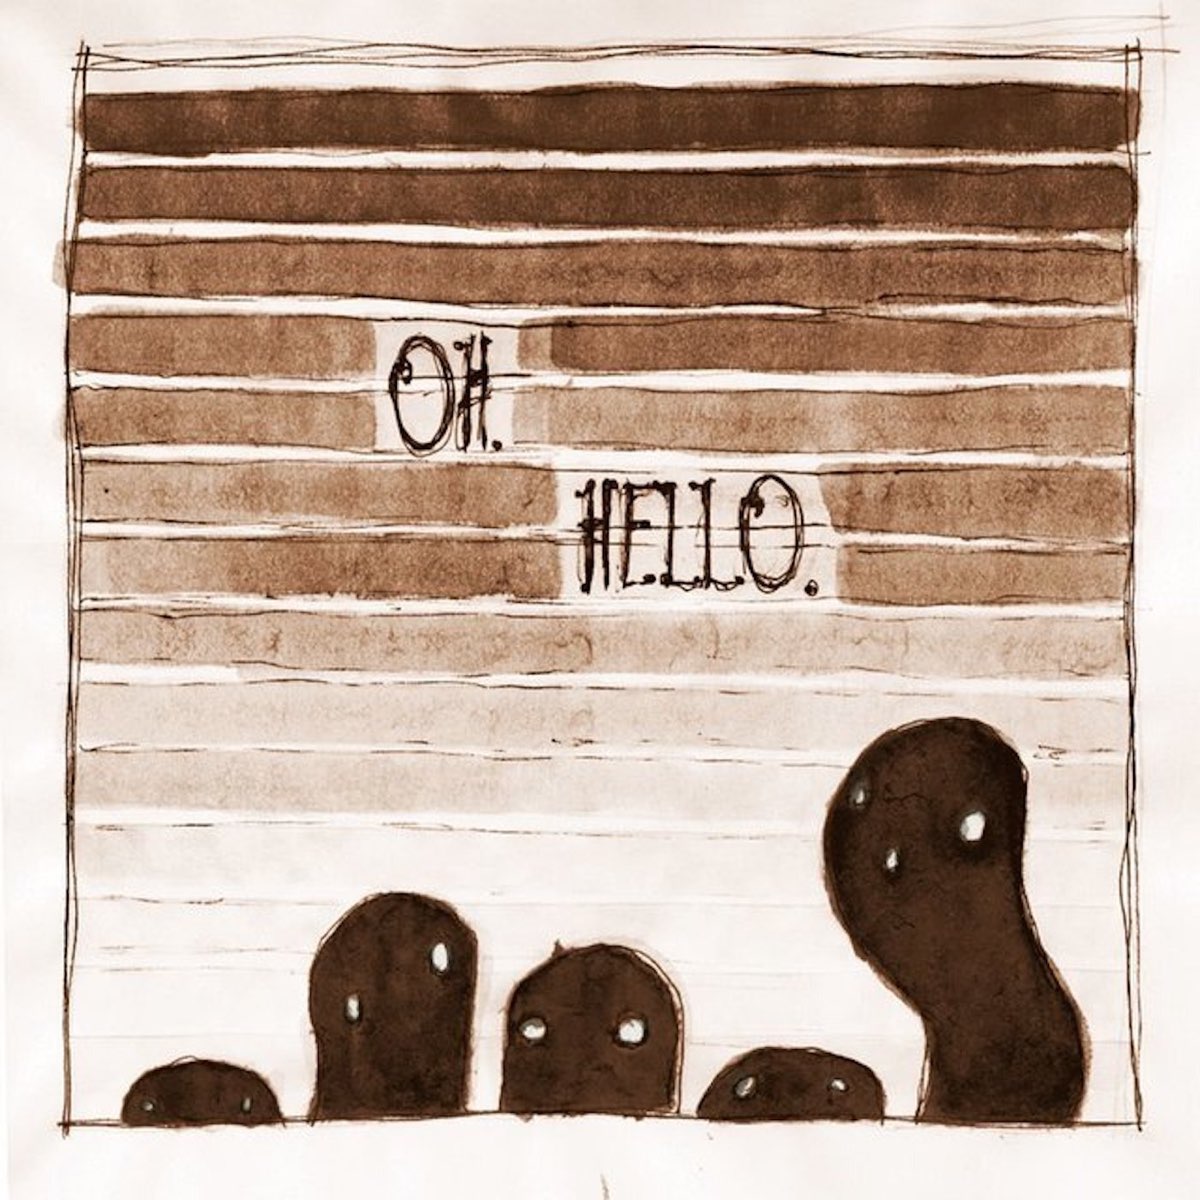 The oh hellos. Hello my old Heart. Hello my old Heart the Oh hello's. The Oh hellos о группе.